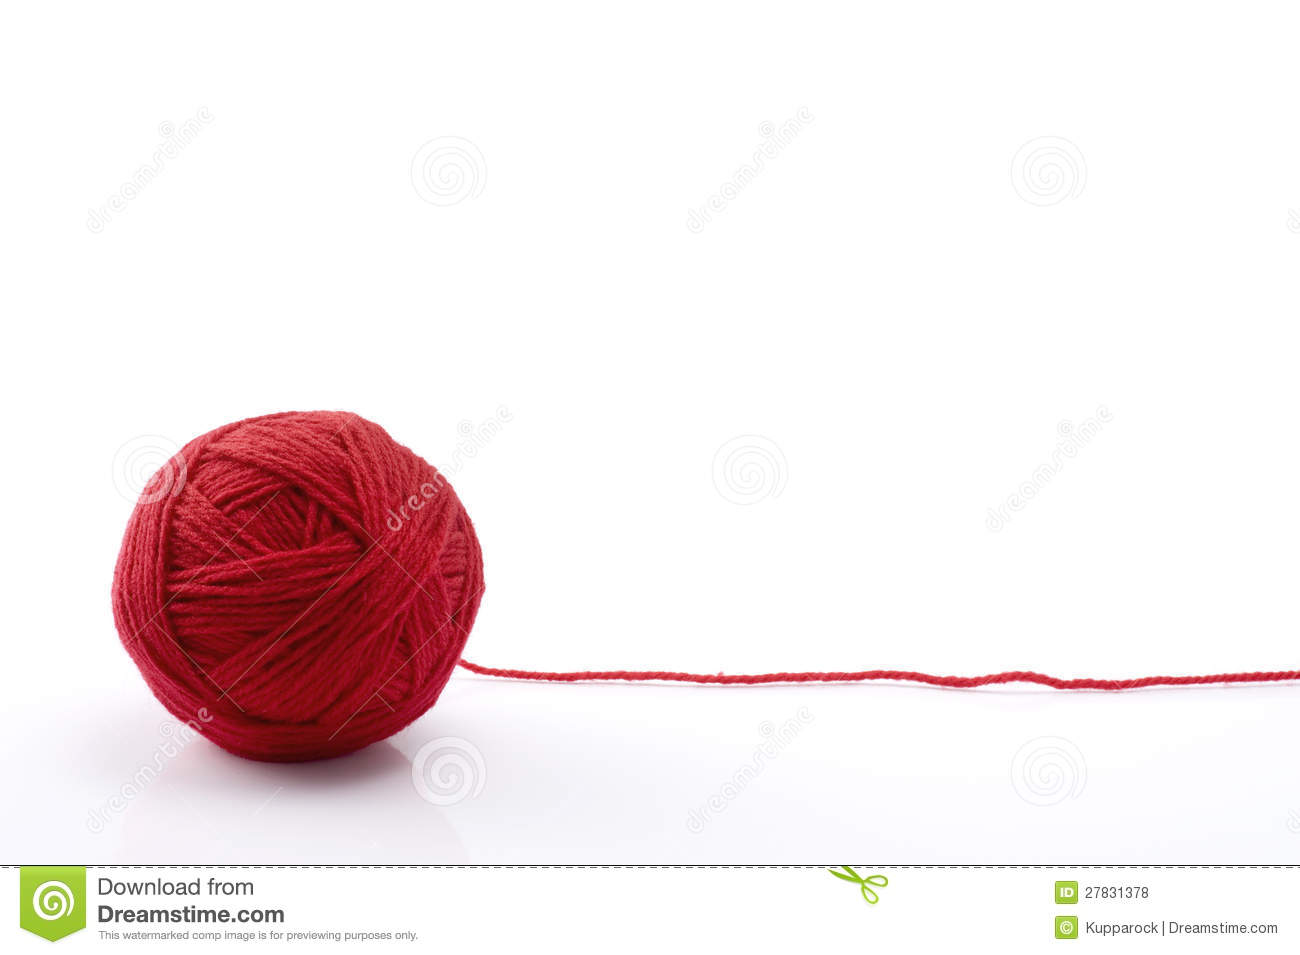 Ball Of Red Yarn Royalty Free Stock Photos   Image  27831378